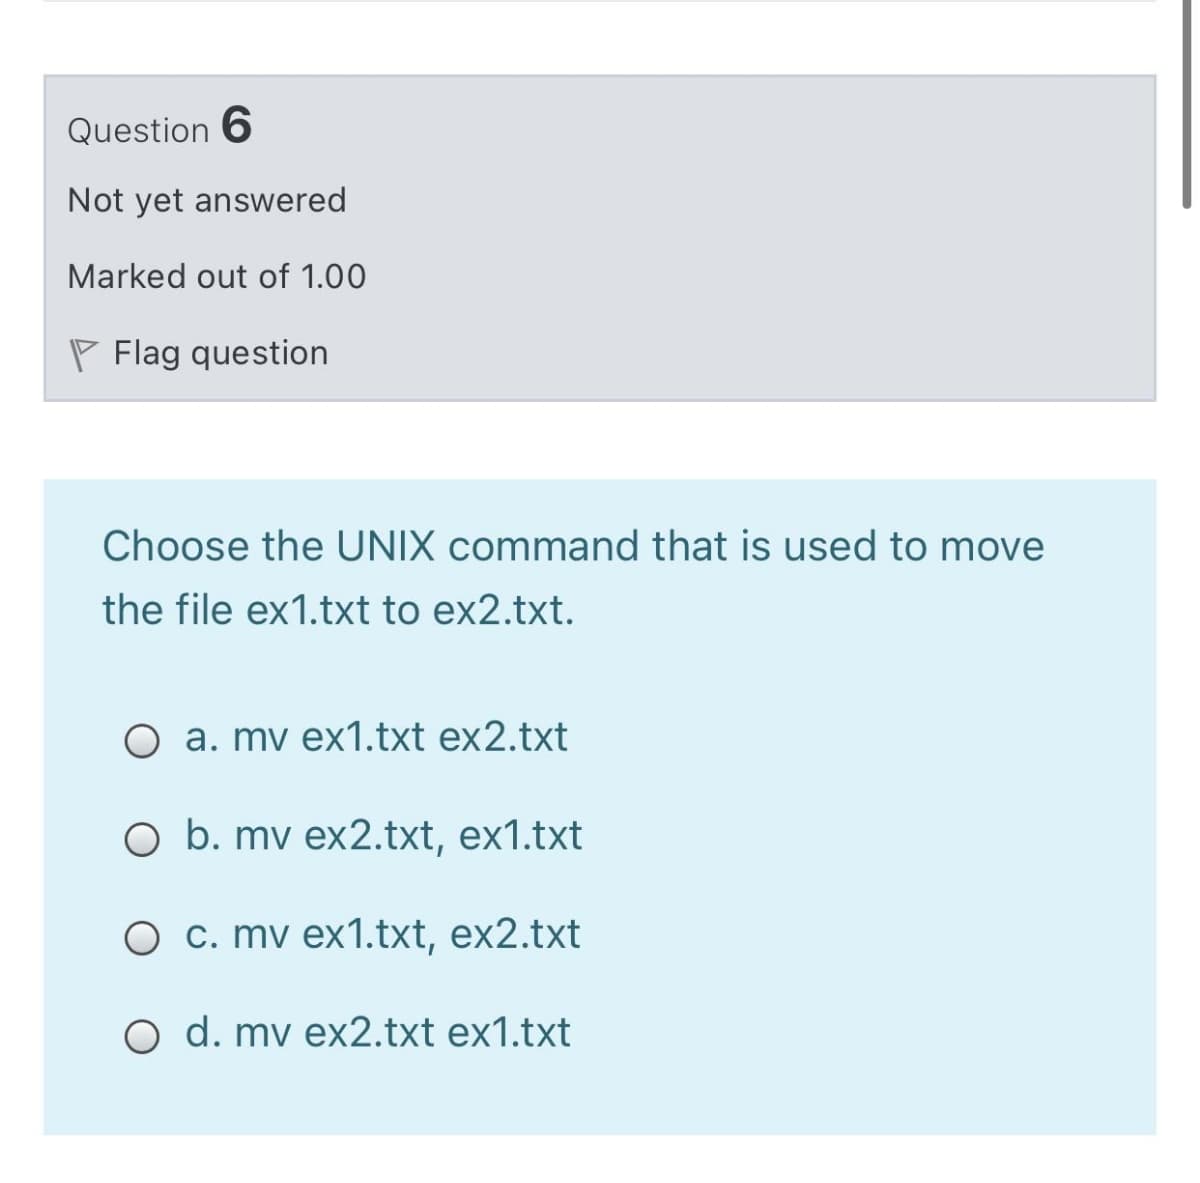 Question 6
Not yet answered
Marked out of 1.00
P Flag question
Choose the UNIX command that is used to move
the file ex1.txt to ex2.txt.
O a. mv ex1.txt ex2.txt
O b. mv ex2.txt, ex1.txt
O c. mv ex1.txt, ex2.txt
O d. mv ex2.txt ex1.txt
